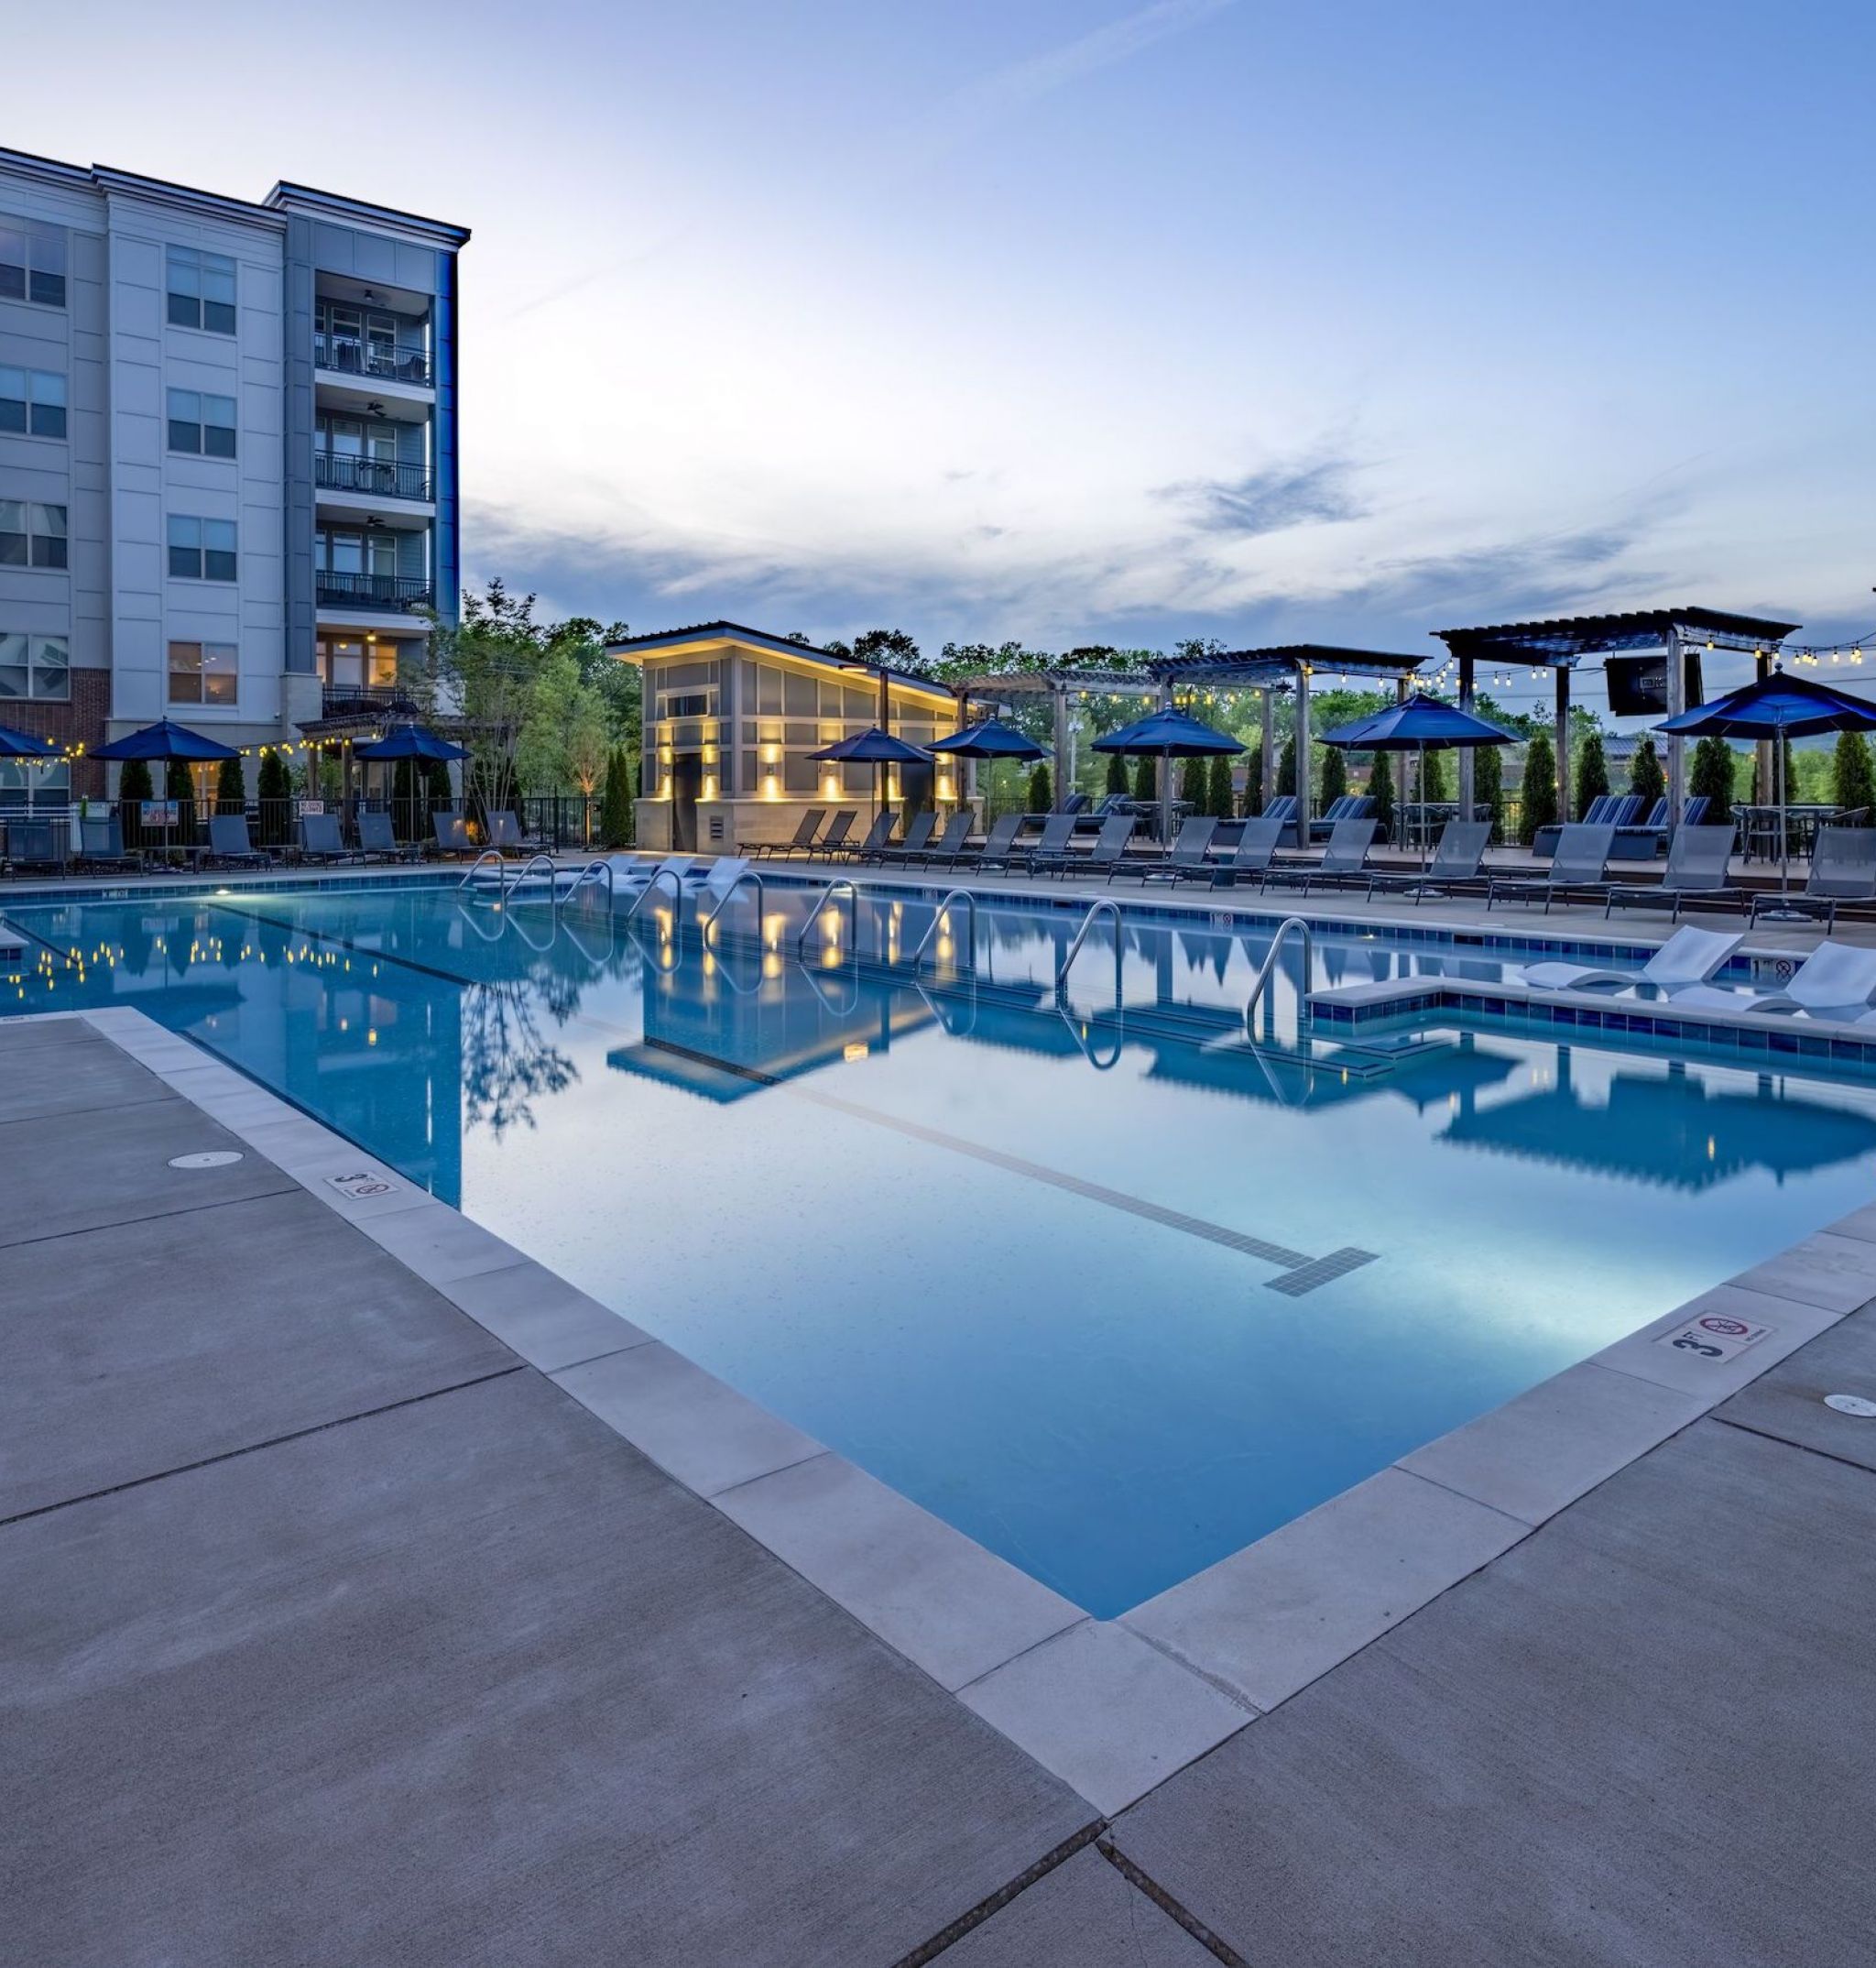 Beautiful view of McEwen Northside Apartment's luxury outdoor pool at night with seating and umbrellas